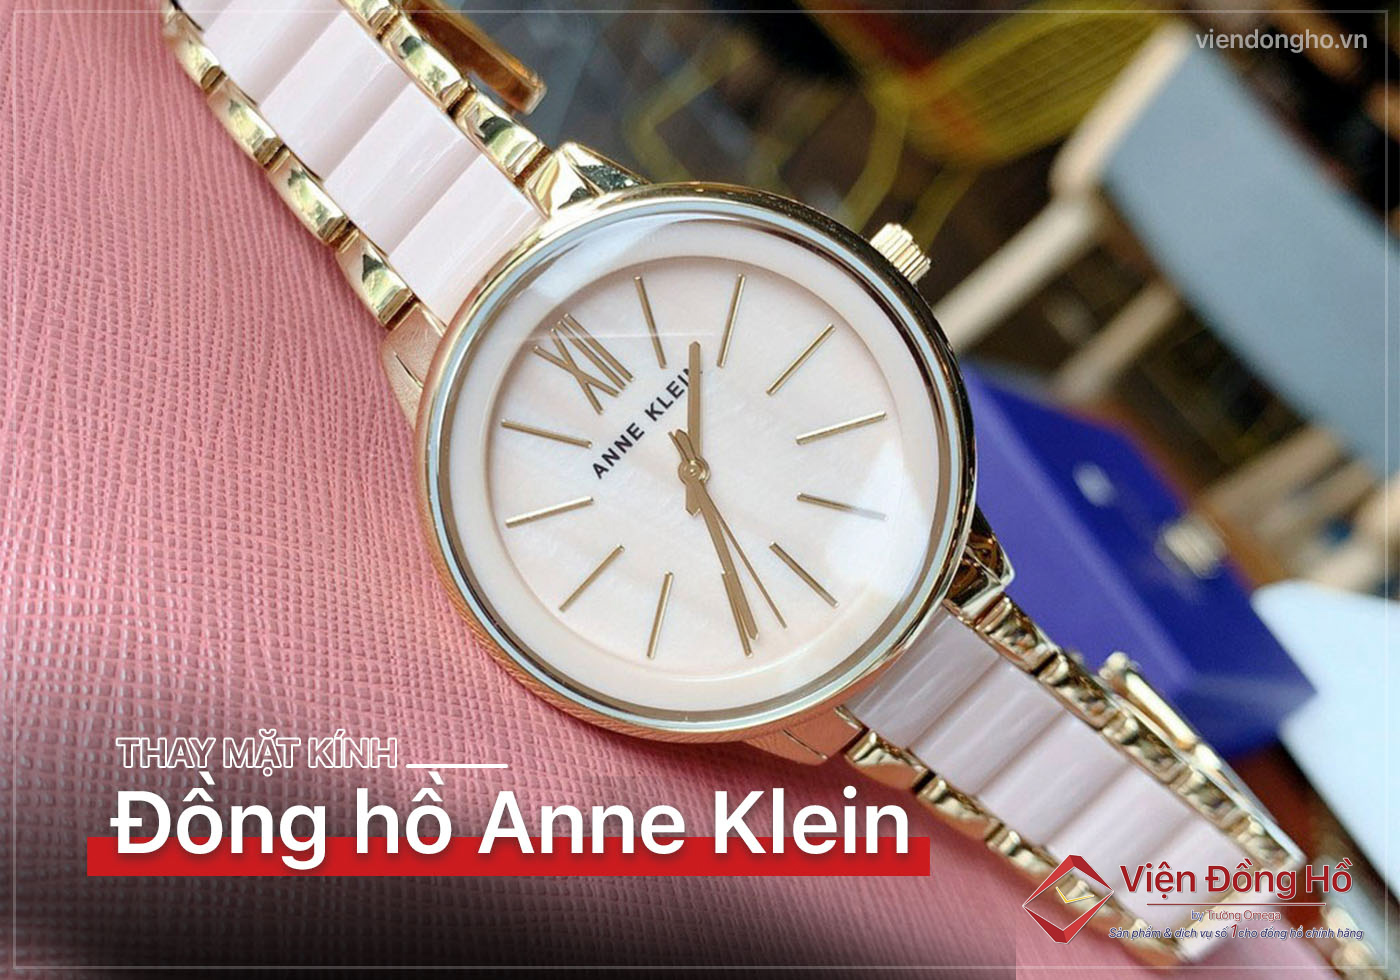 Thay mat kinh dong ho Anne Klein 5